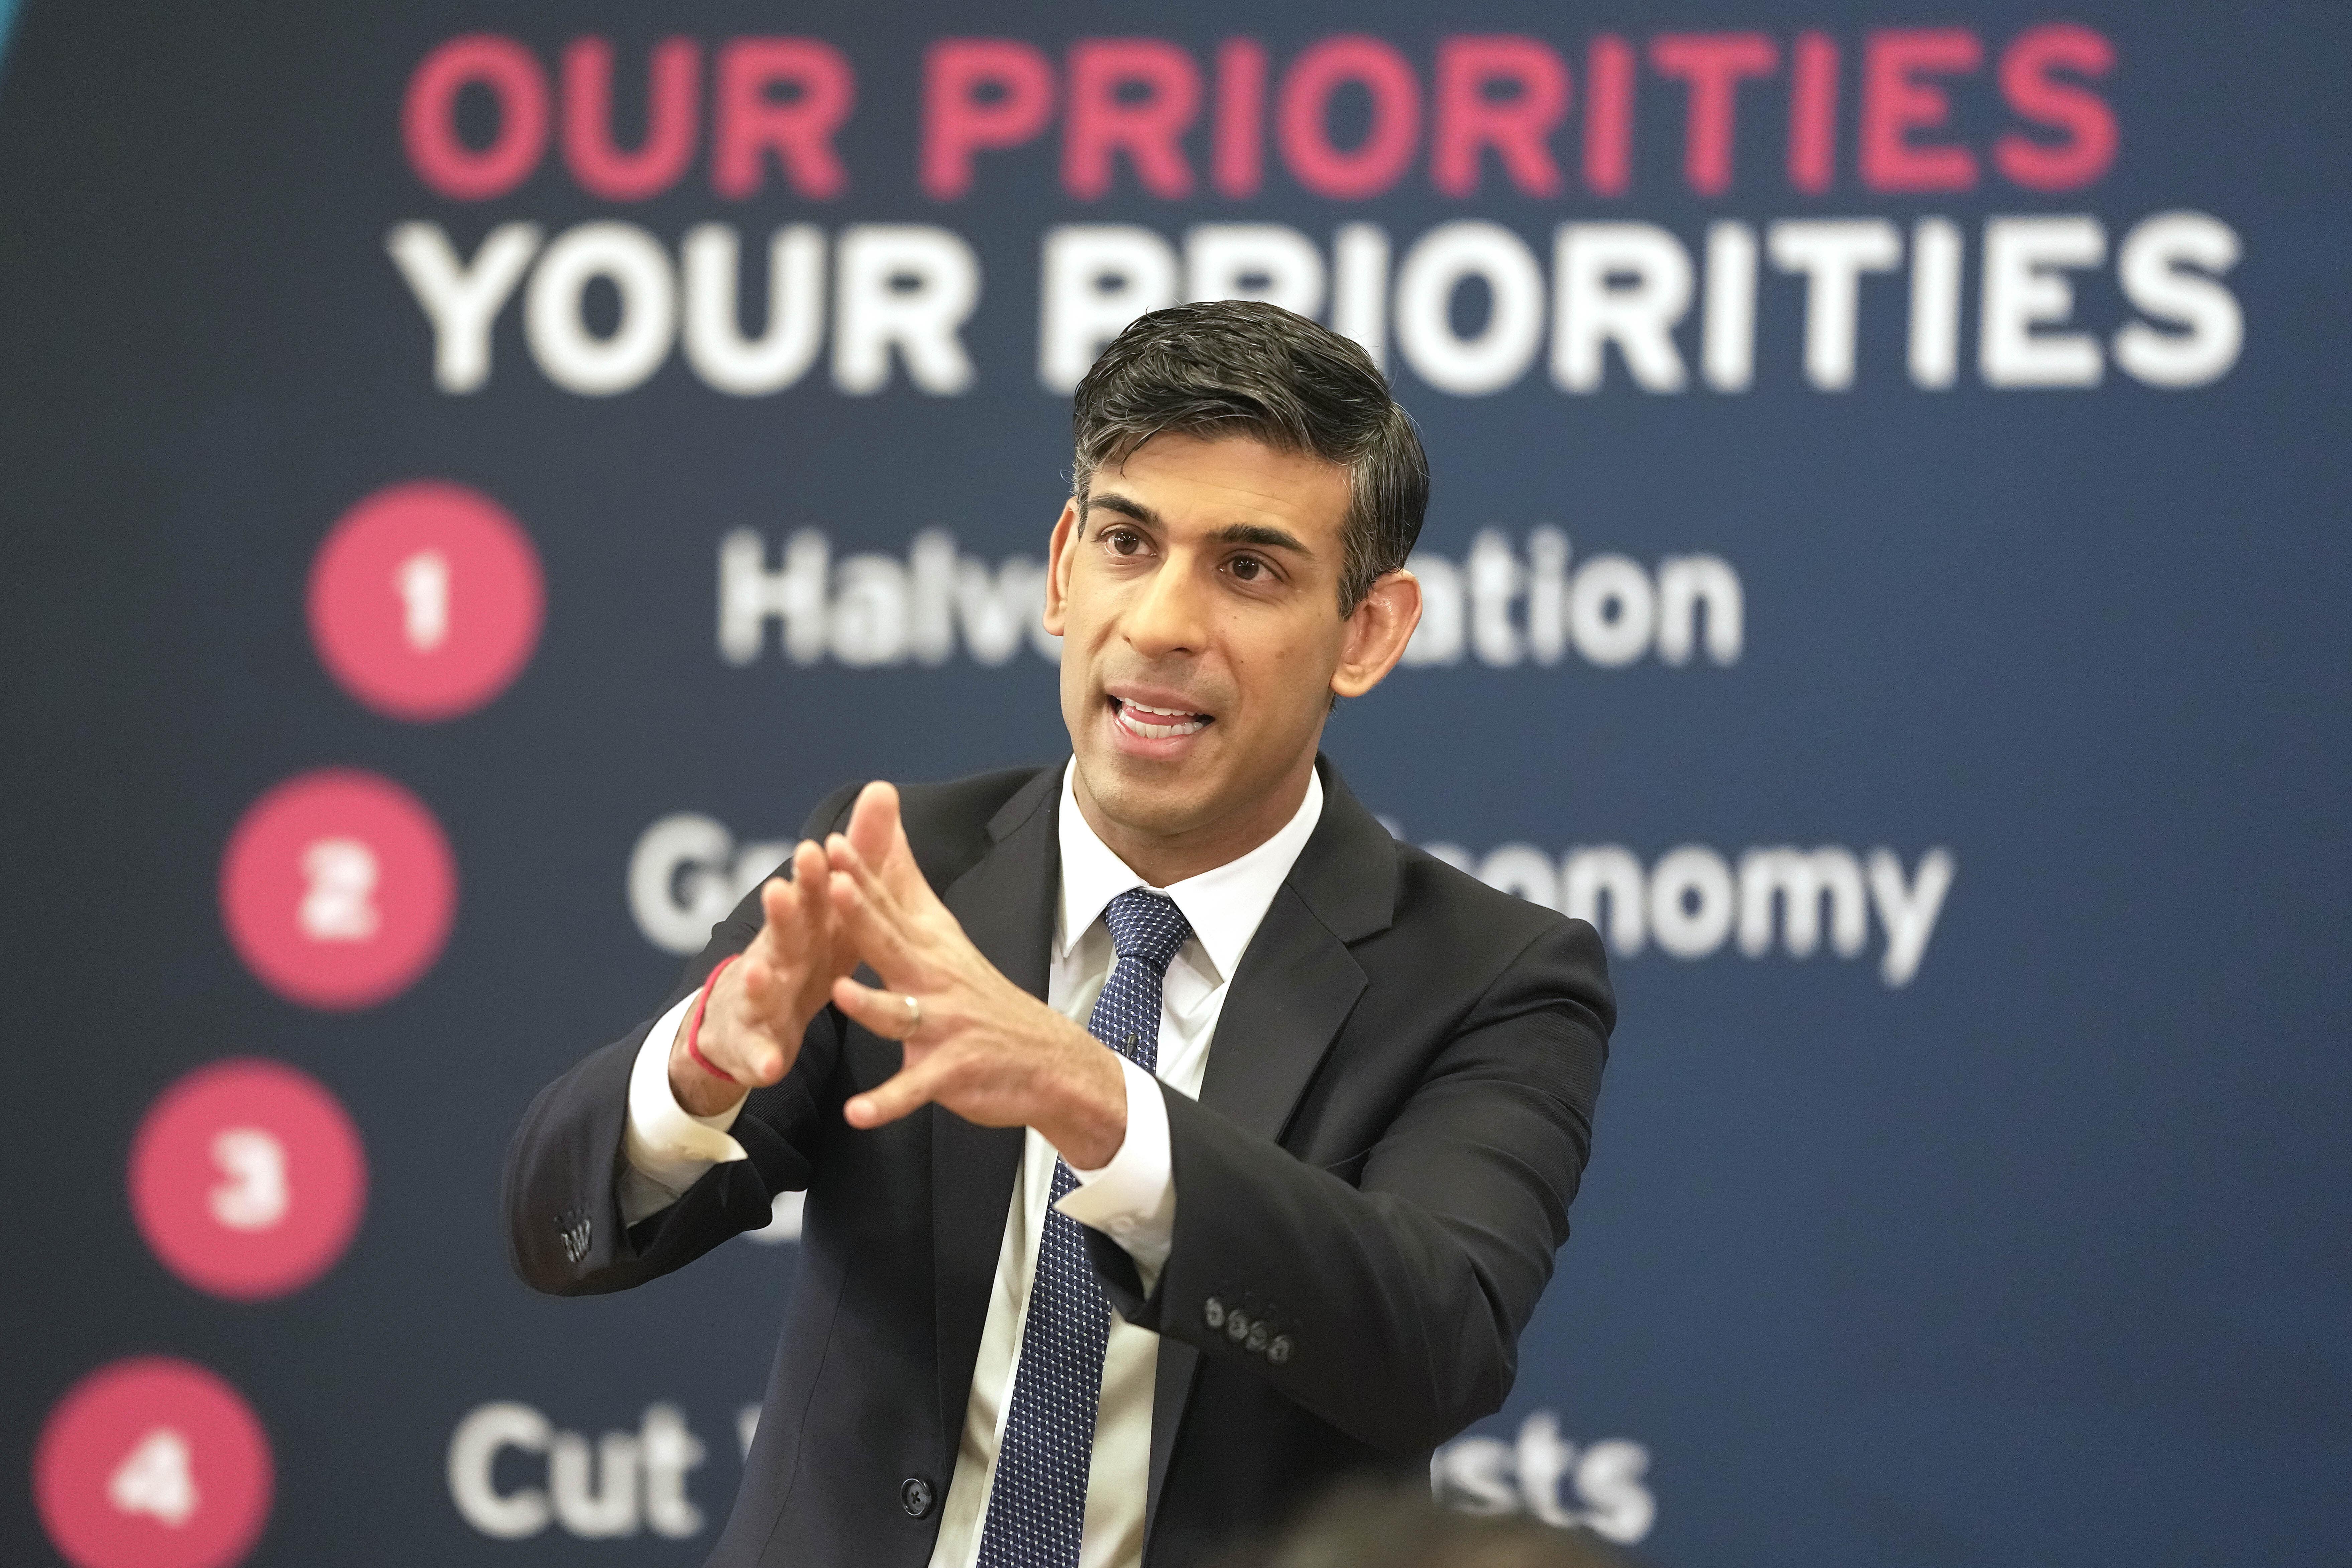 Prime minister Rishi Sunak wants every child to study maths until the age of 18